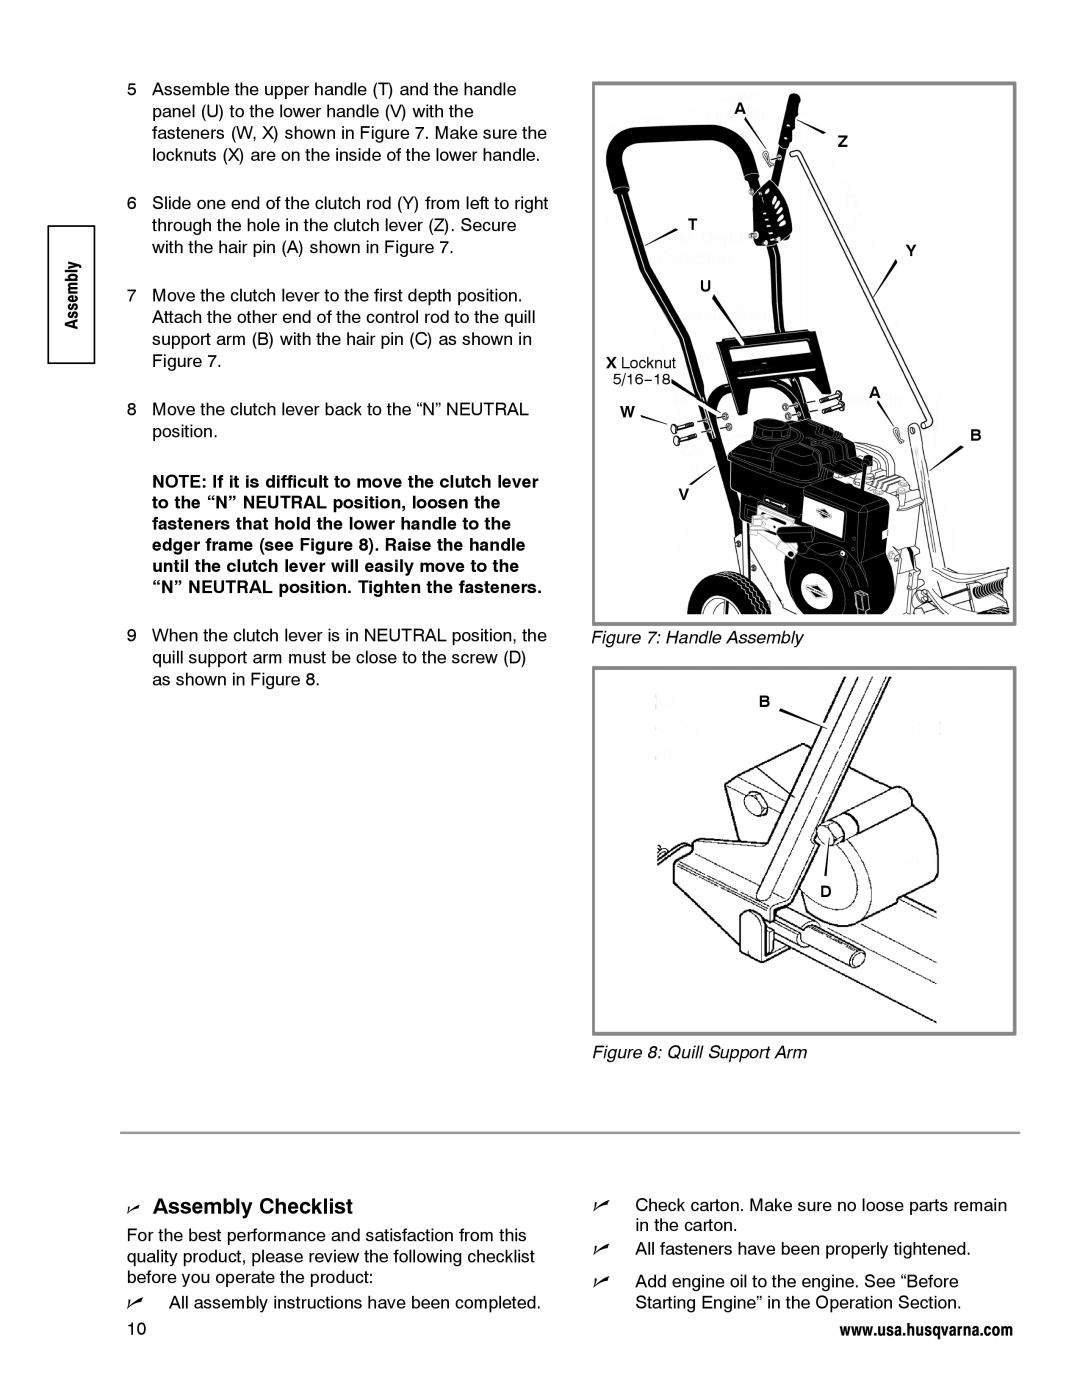 Husqvarna LE389 manual n Assembly Checklist, Handle Assembly, Quill Support Arm 